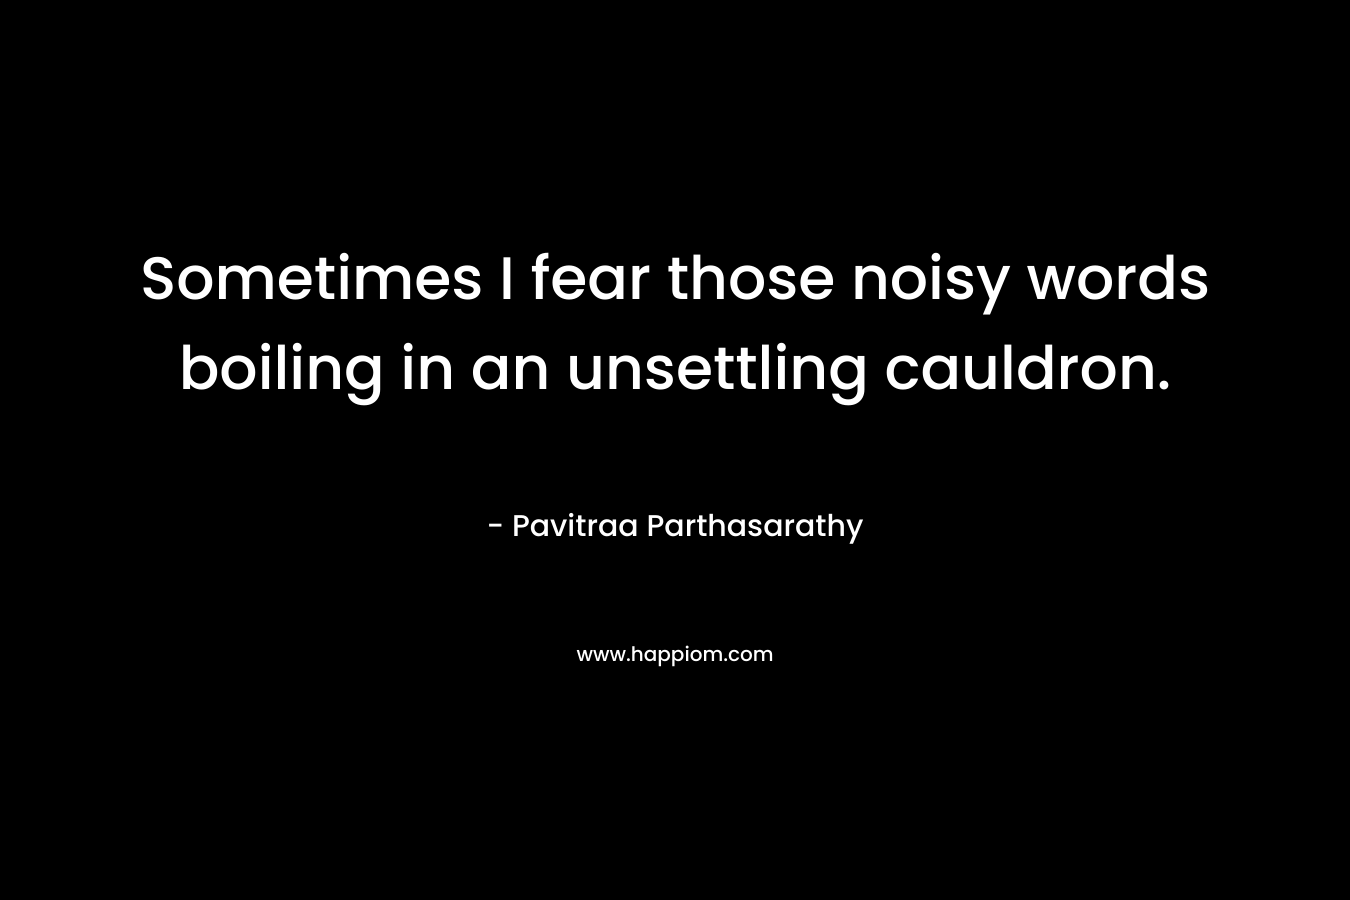 Sometimes I fear those noisy words boiling in an unsettling cauldron. – Pavitraa Parthasarathy